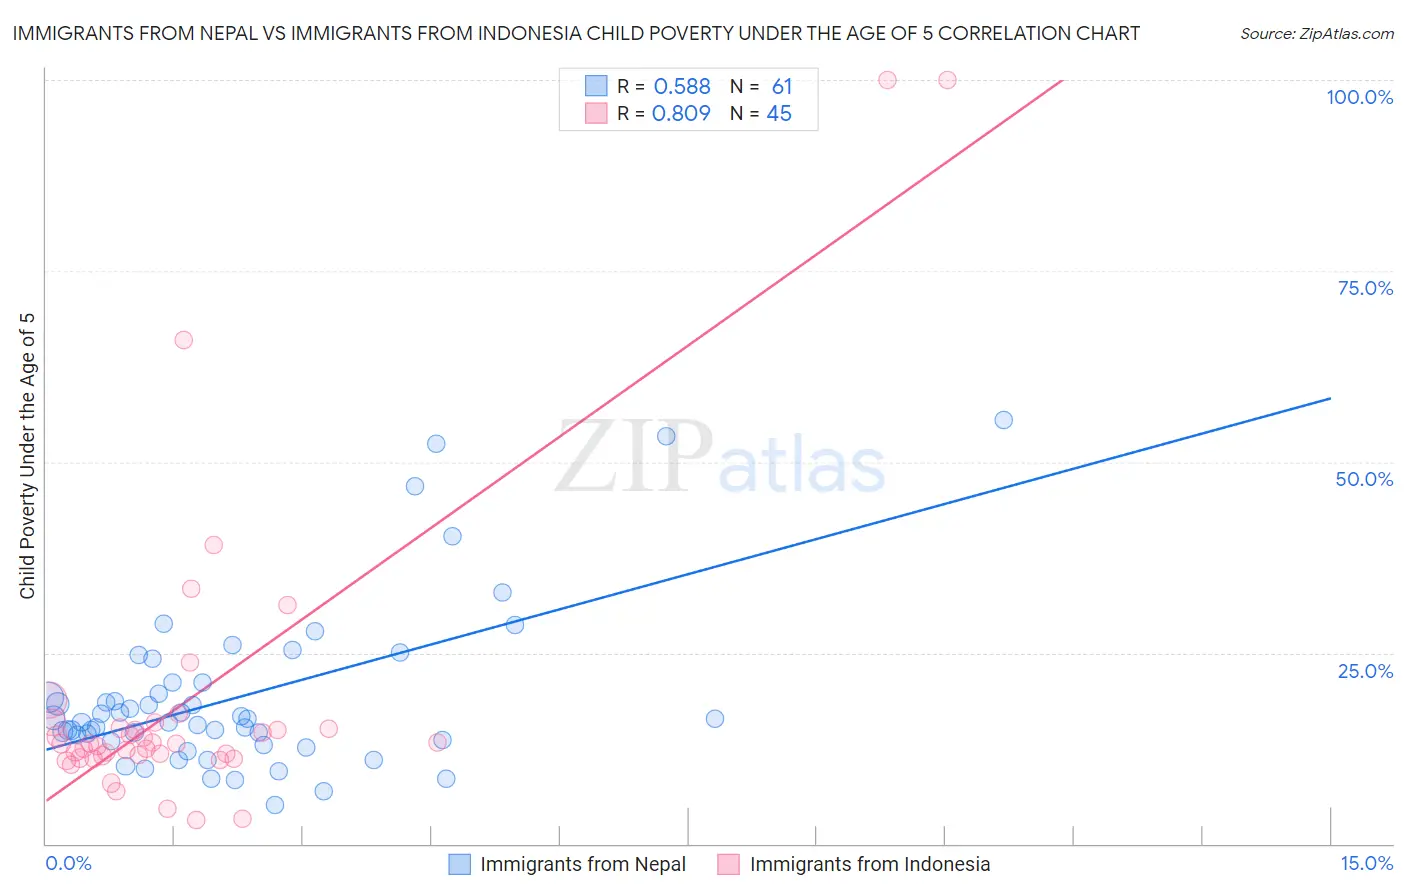 Immigrants from Nepal vs Immigrants from Indonesia Child Poverty Under the Age of 5